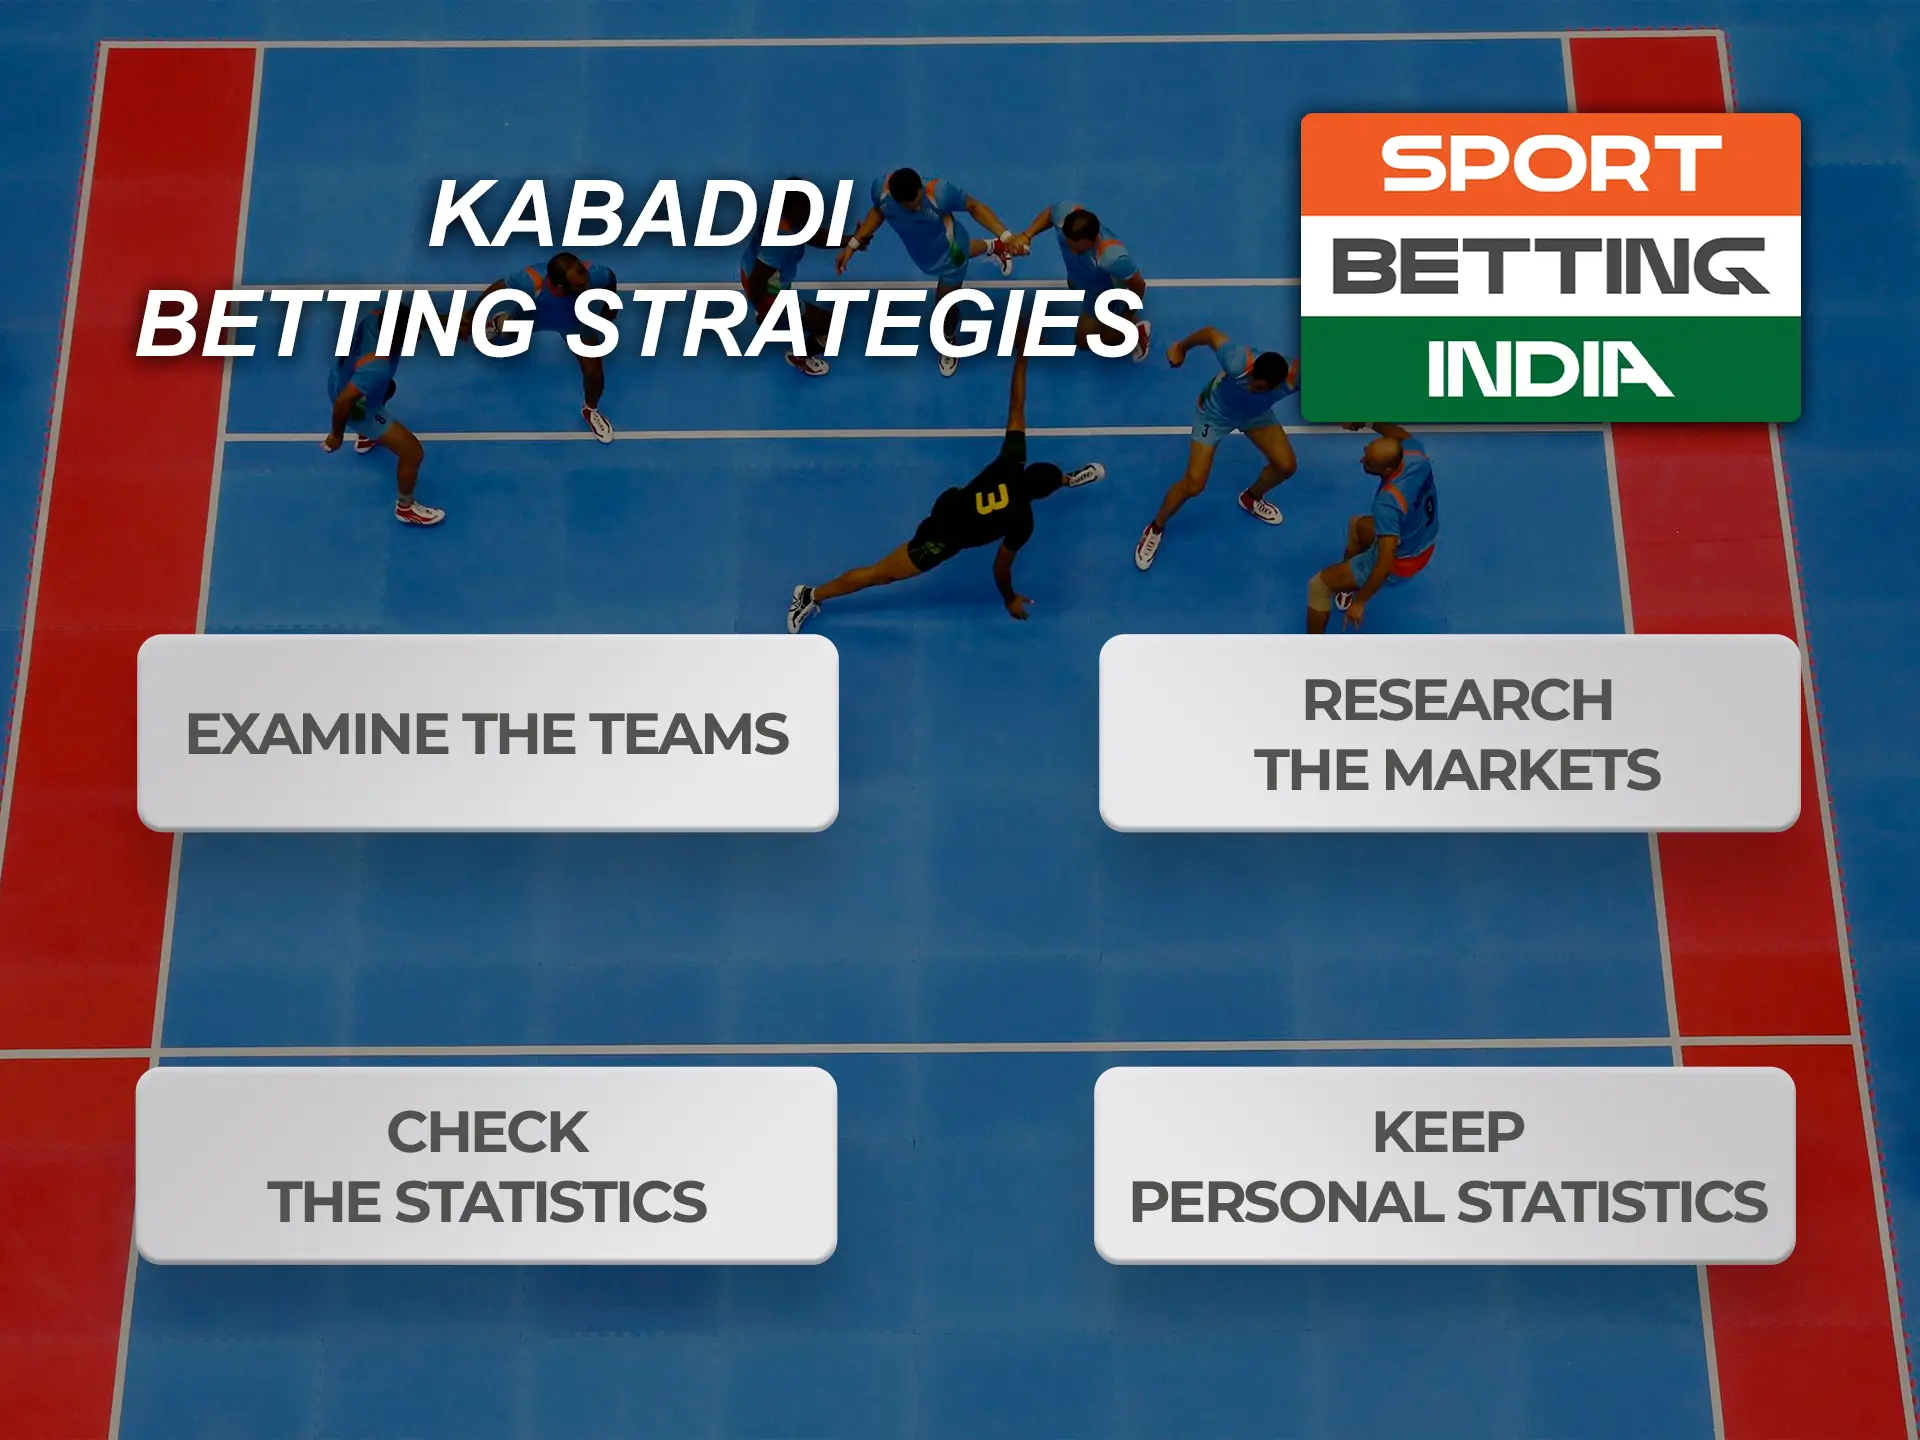 Kabaddi is a popular sport where it is important to understand the process of the game and choose the right strategy for betting.